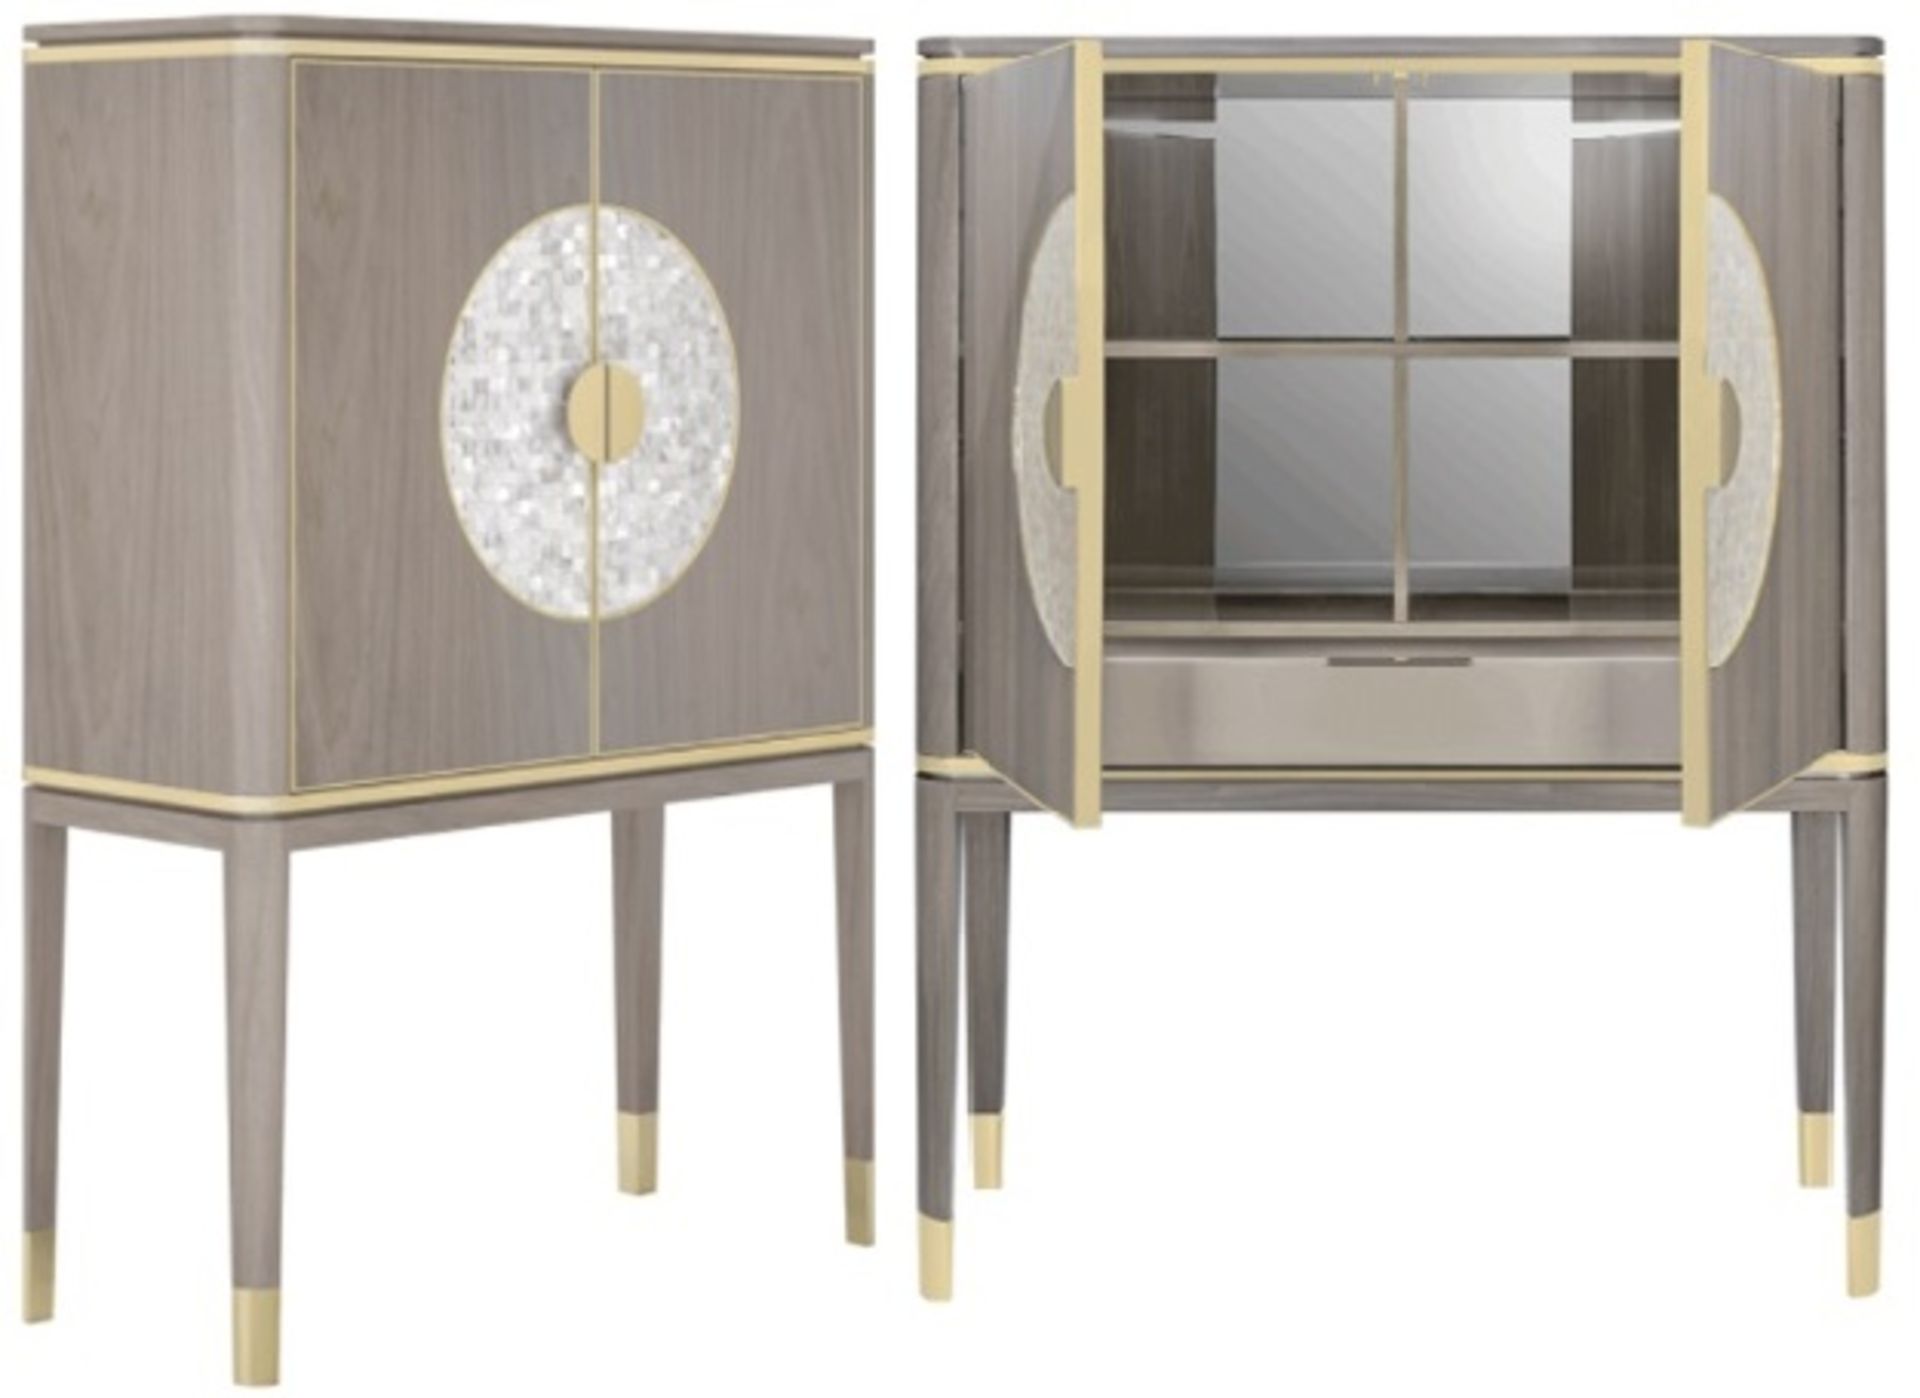 1 x FRATO 'Seville' Luxury Designer 2-Door Tall Cabinet With A High Gloss Finish - RRP £7,968